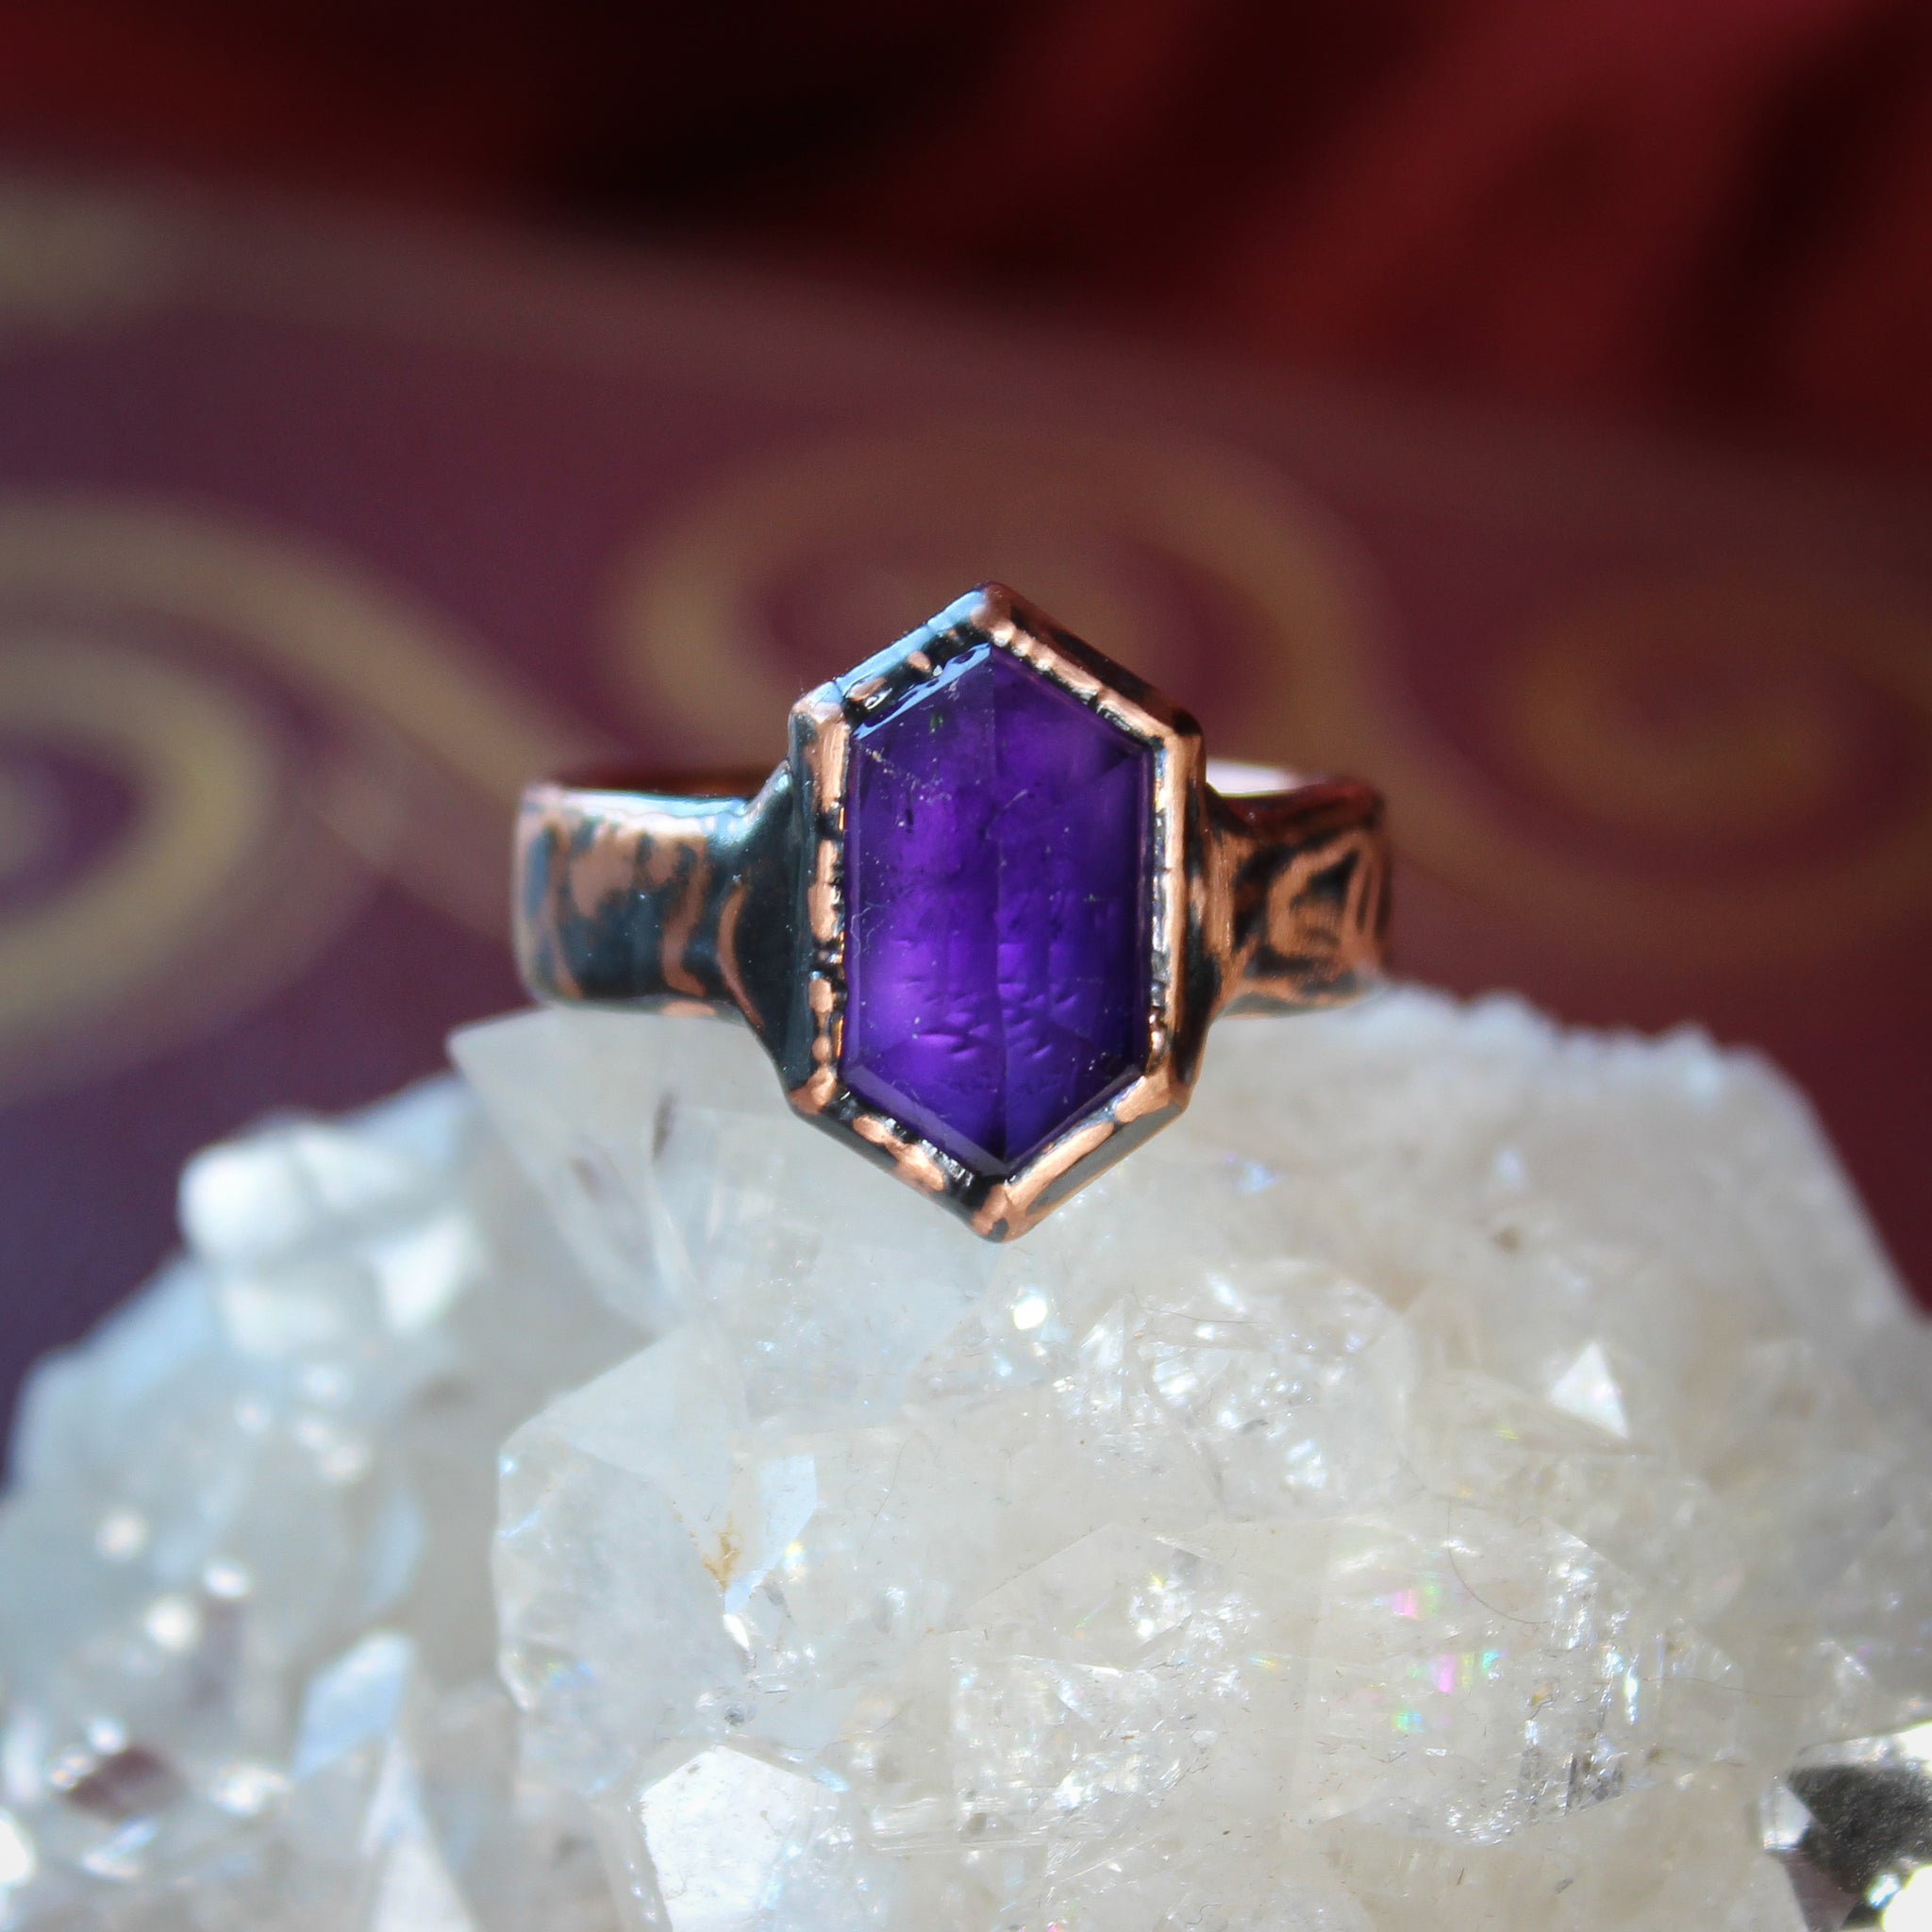 Faceted, Deep Purple Amethyst Ring Size 8.75